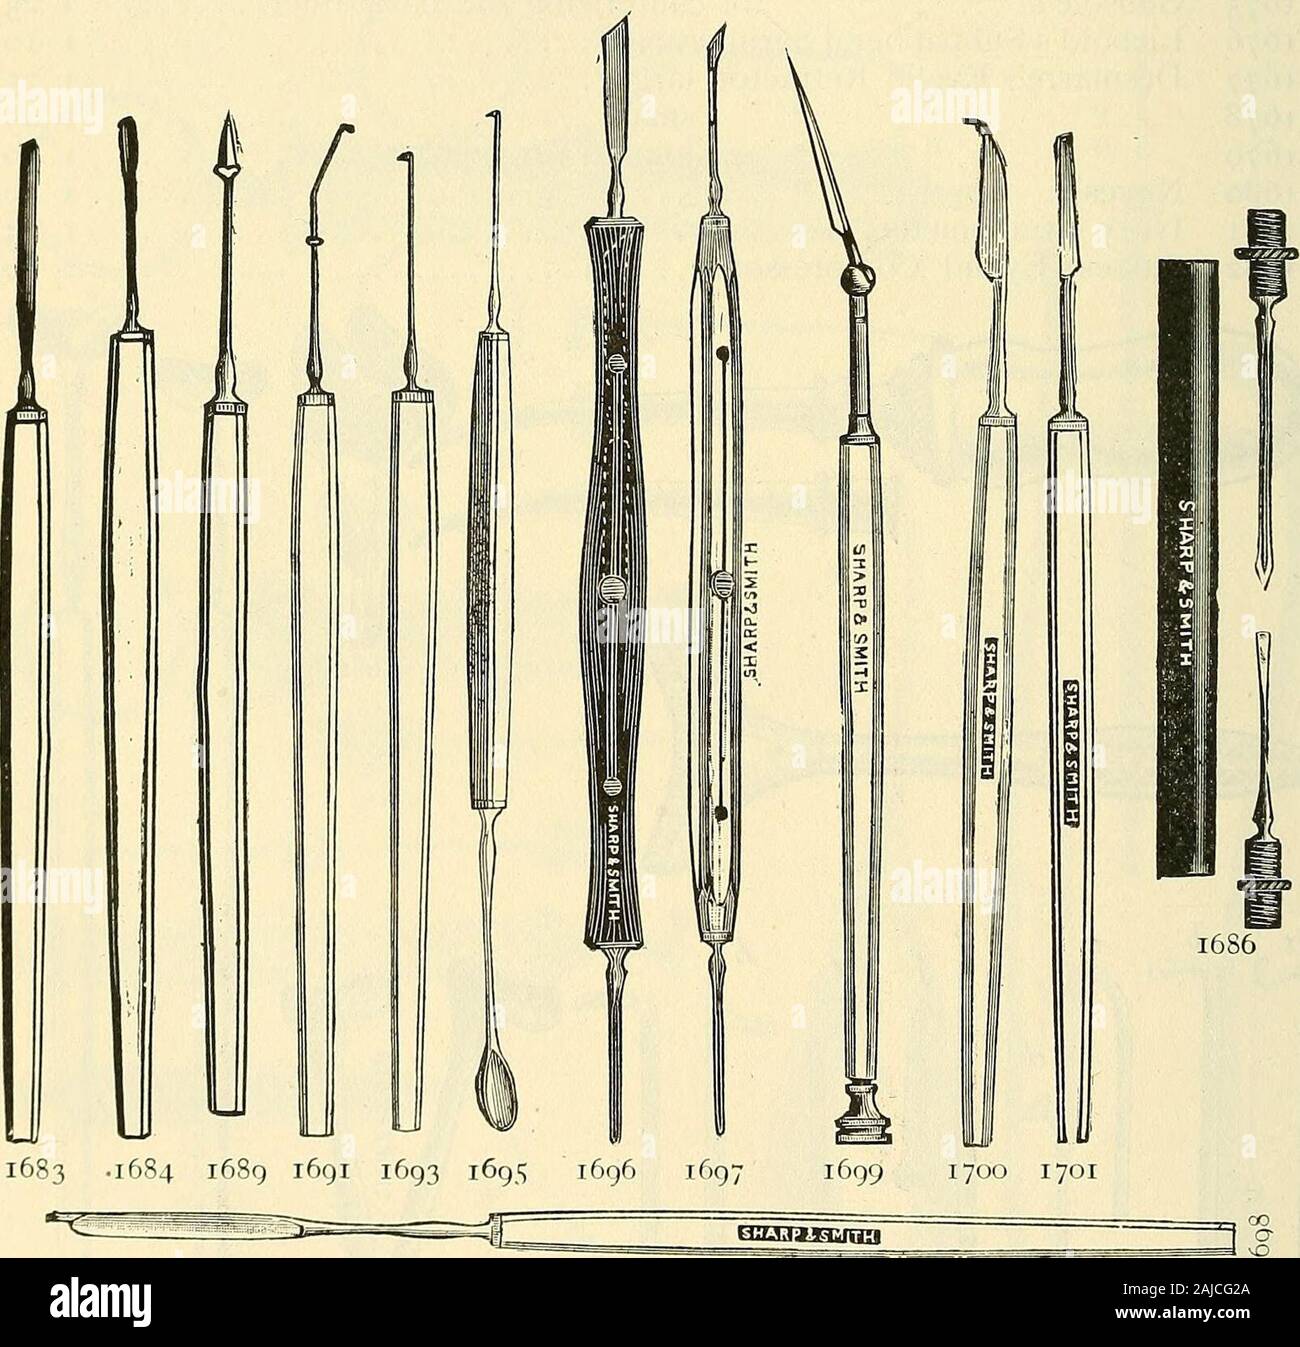 Catalogue of Sharp & Smith : importers, manufacturers, wholesale and retail dealers in surgical instruments, deformity apparatus, artificial limbs, artificial eyes, elastic stockings, trusses, crutches, supporters, galvanic and faradic batteries, etc., surgeons' appliances of every description . 1670 1679 1678 1677 370 SHARP & SMITH, CHICAGO. *i683*i6S4 16S5*i686 1687 1688*i6S9 1690*i69i 1692*i693 1694*i695*i696*i697*i698*i6g9*i700*i70i *I702 EYE INSTRUMENTS. D i X s Spud, half round S| i 00 flat 1 CIO and Curette i 85 and Exploring Needle 2 00 Waltons Foreign Body Gouge 1 10 Desmarres Trocar, Stock Photo